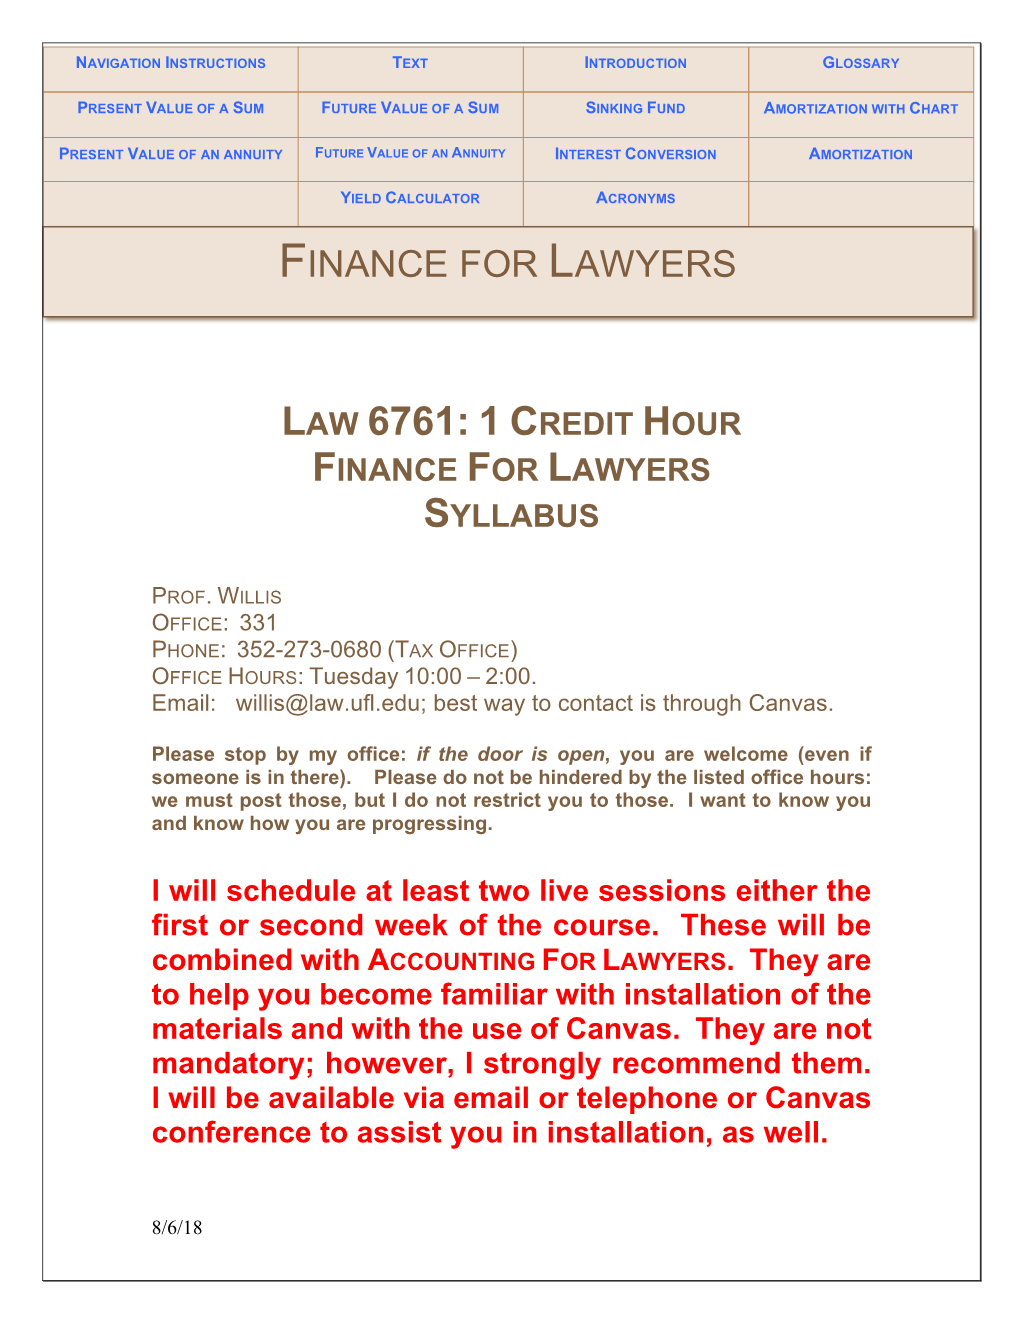 Law 6761: 1 Credit Hour Finance for Lawyers Syllabus